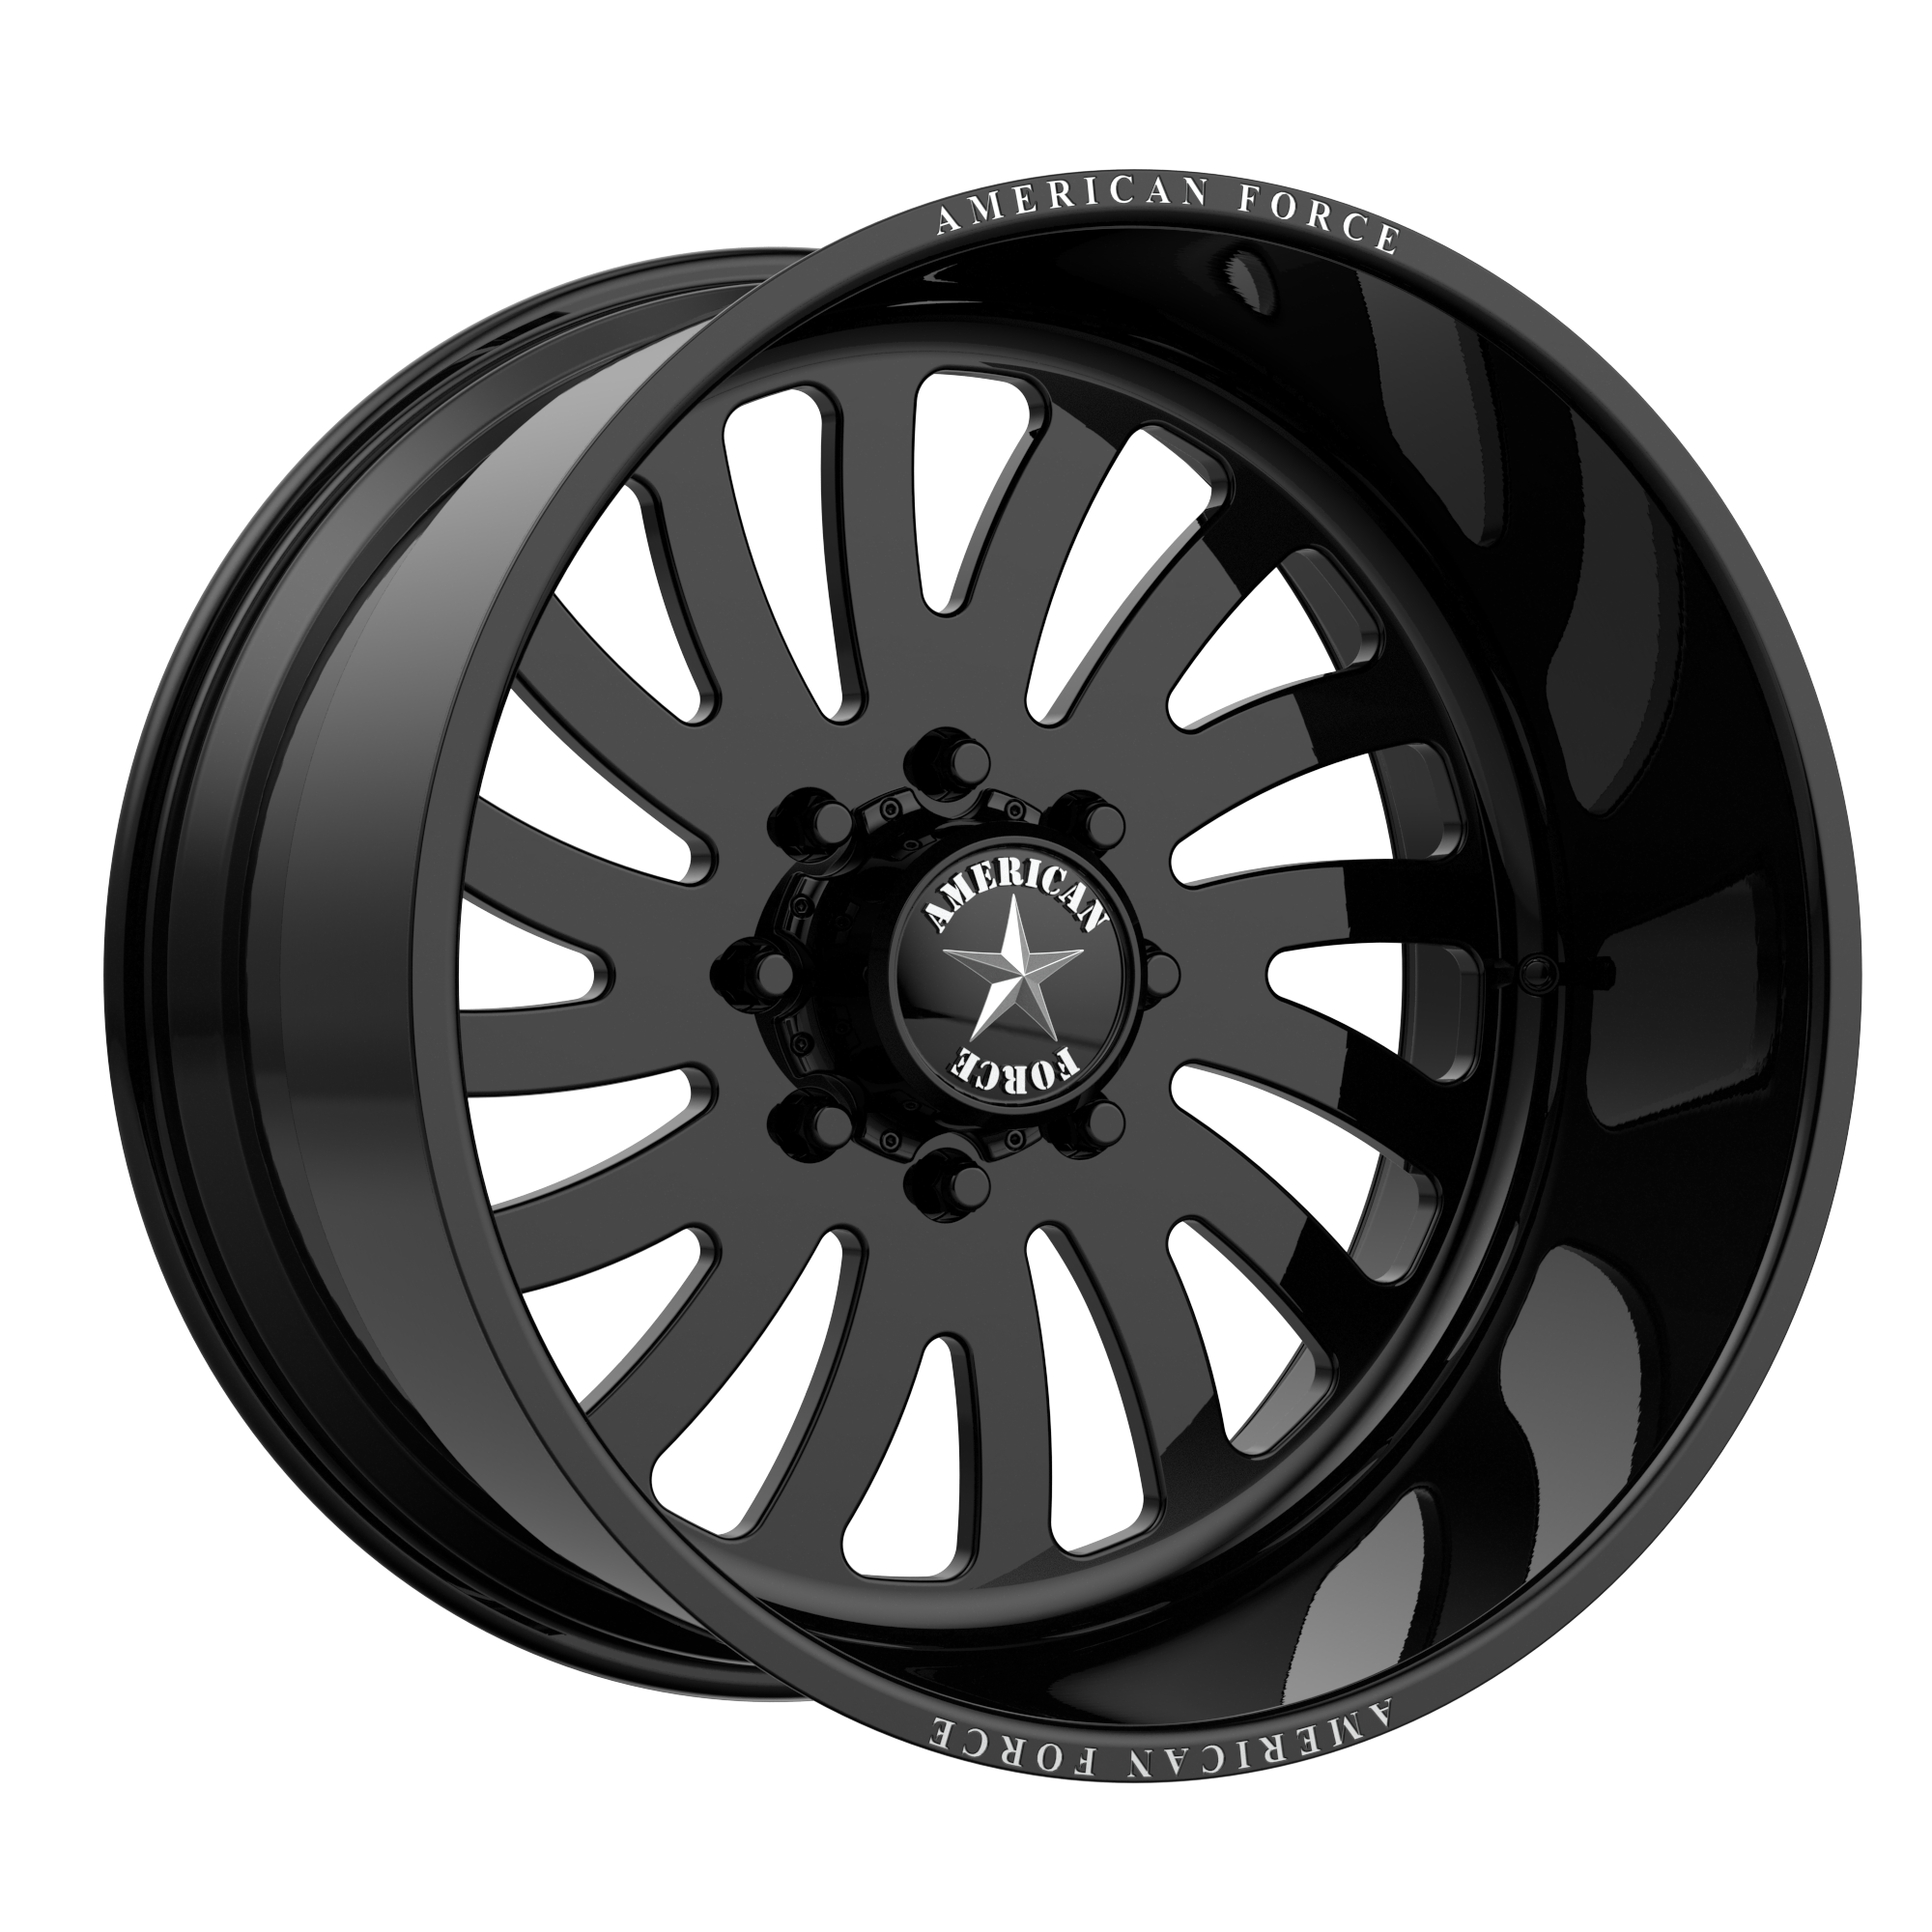 OCTANE SS 20x10 6x139.70 GLOSS BLACK MACHINED (-25 mm) - Tires and Engine Performance